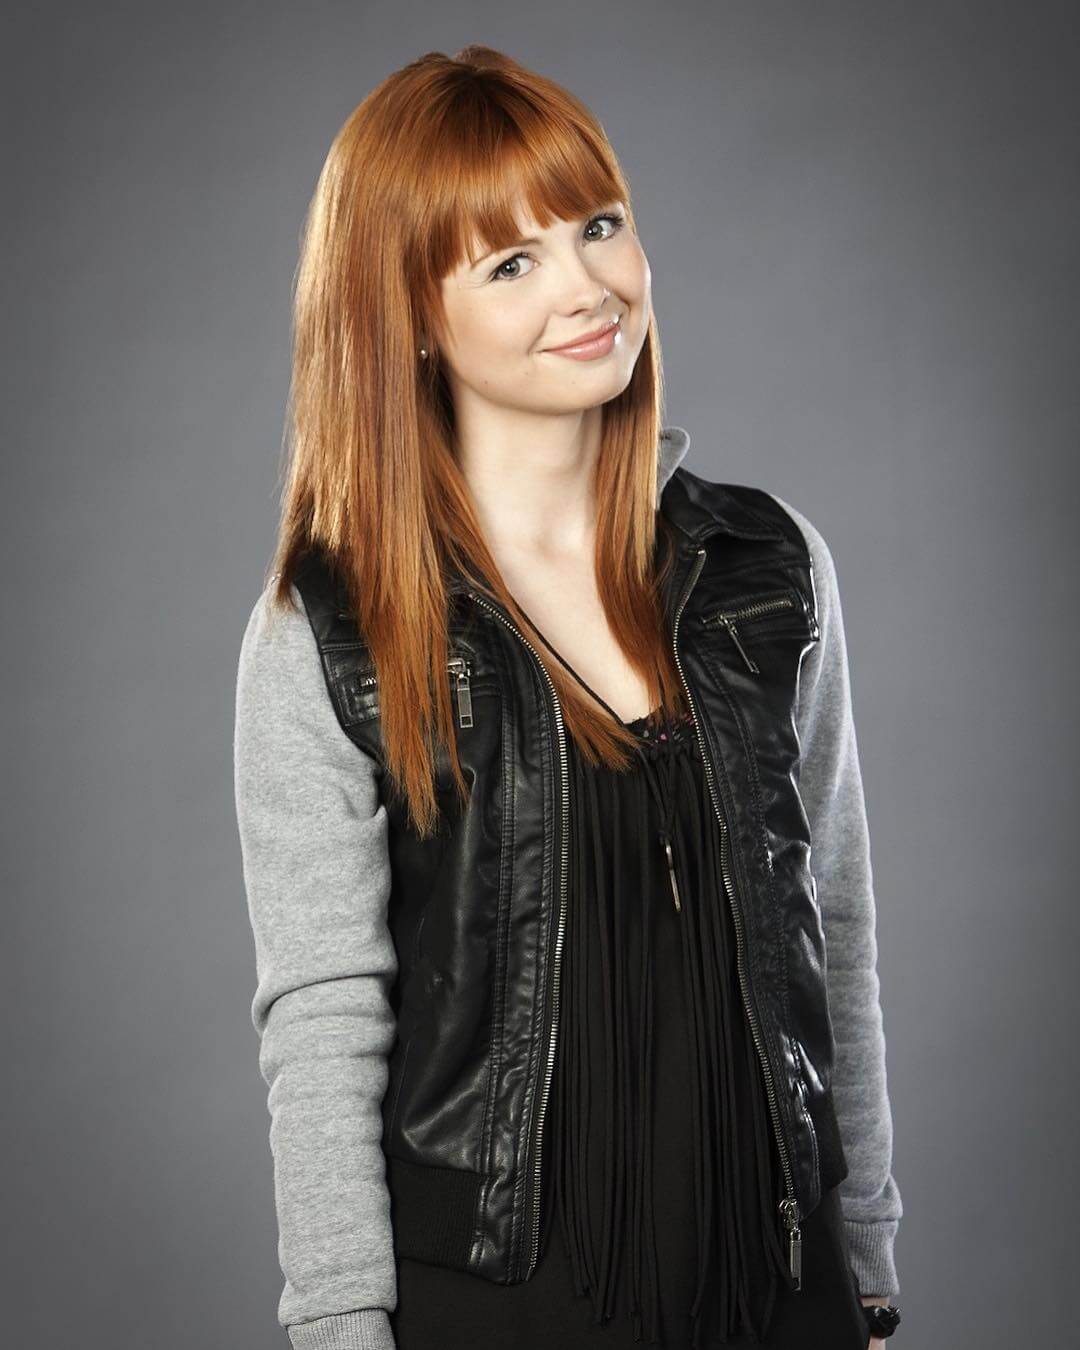  Galadriel Stineman In Grey & Black Leather Jacket With Flappy Style Outfit